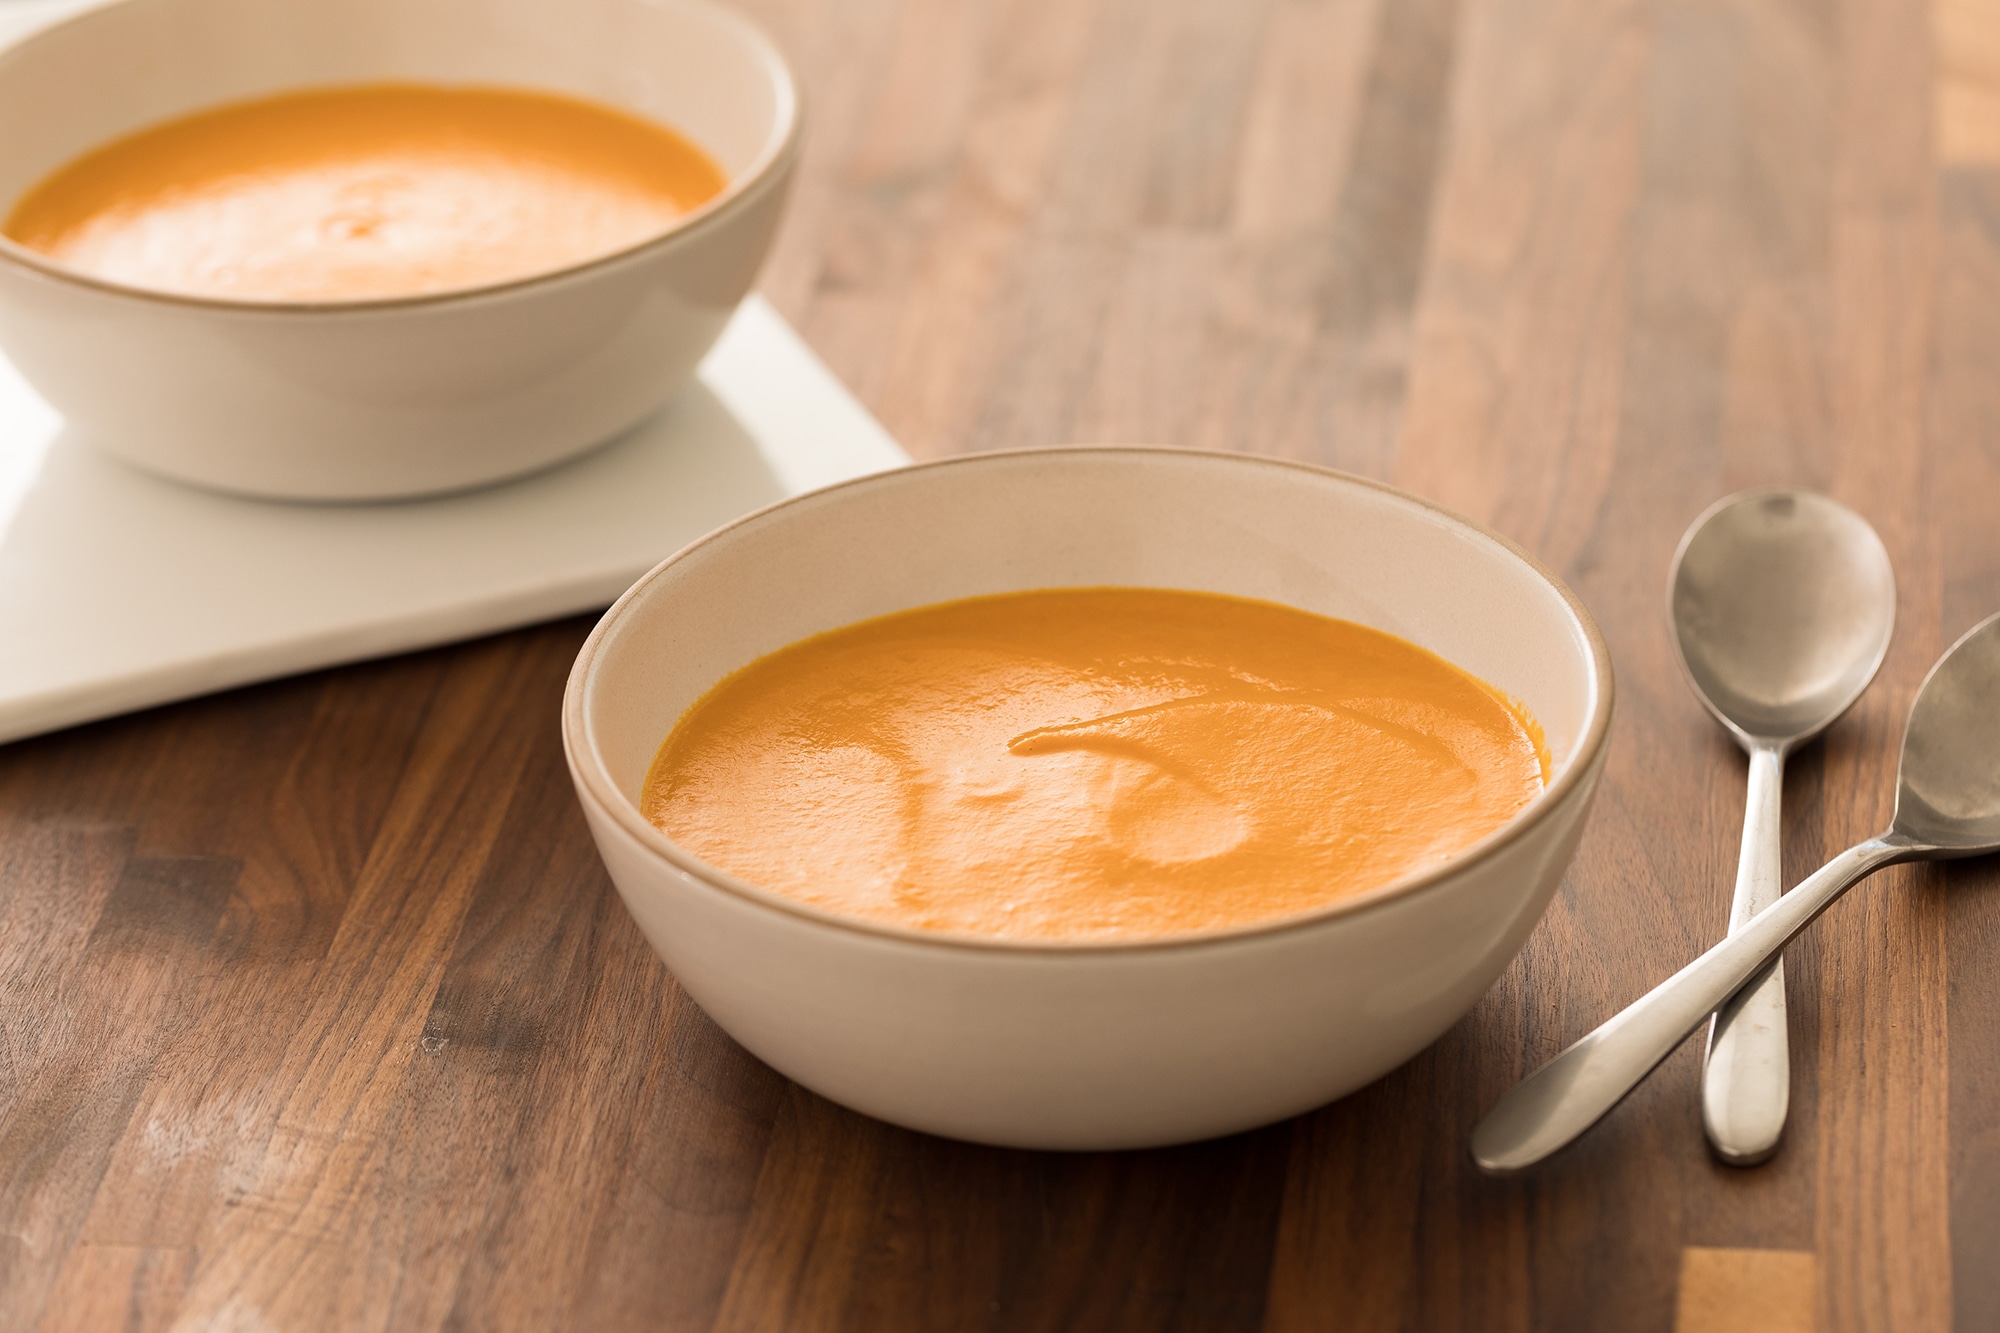 Serve up this delicious creamy soup